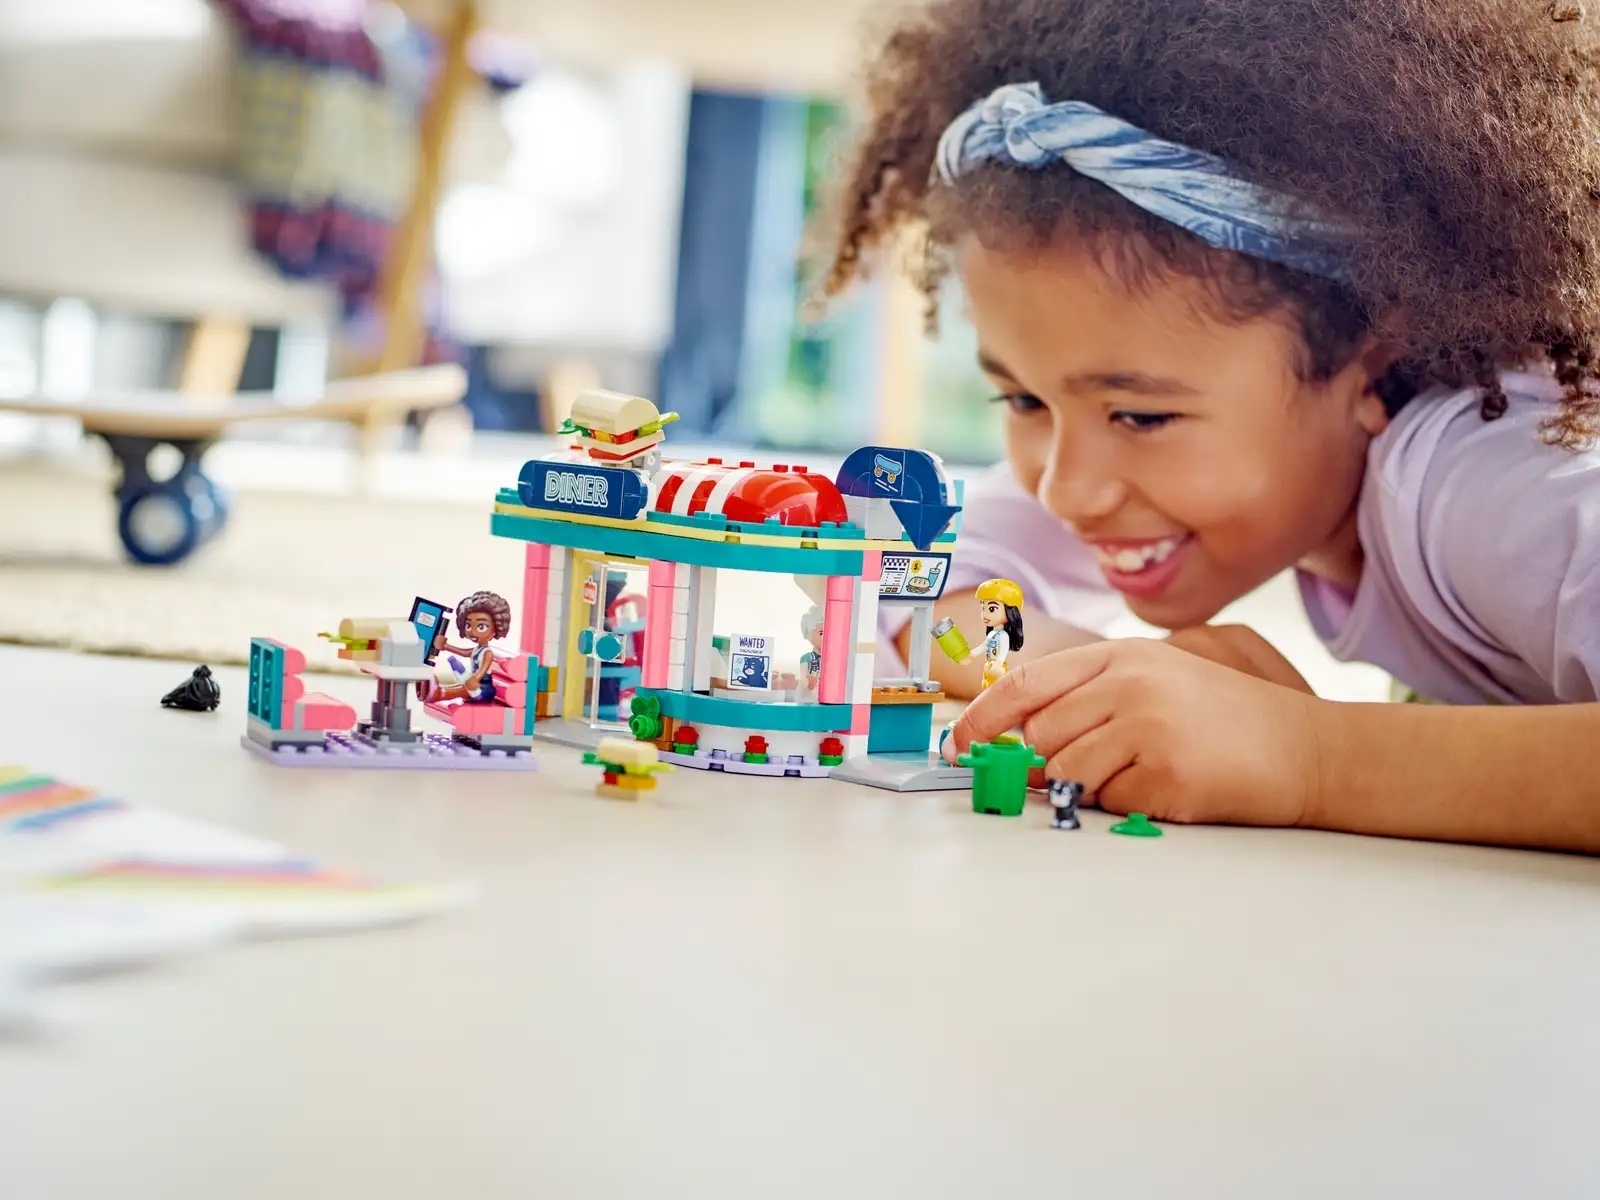 A young girl plays with a diner LEGO set